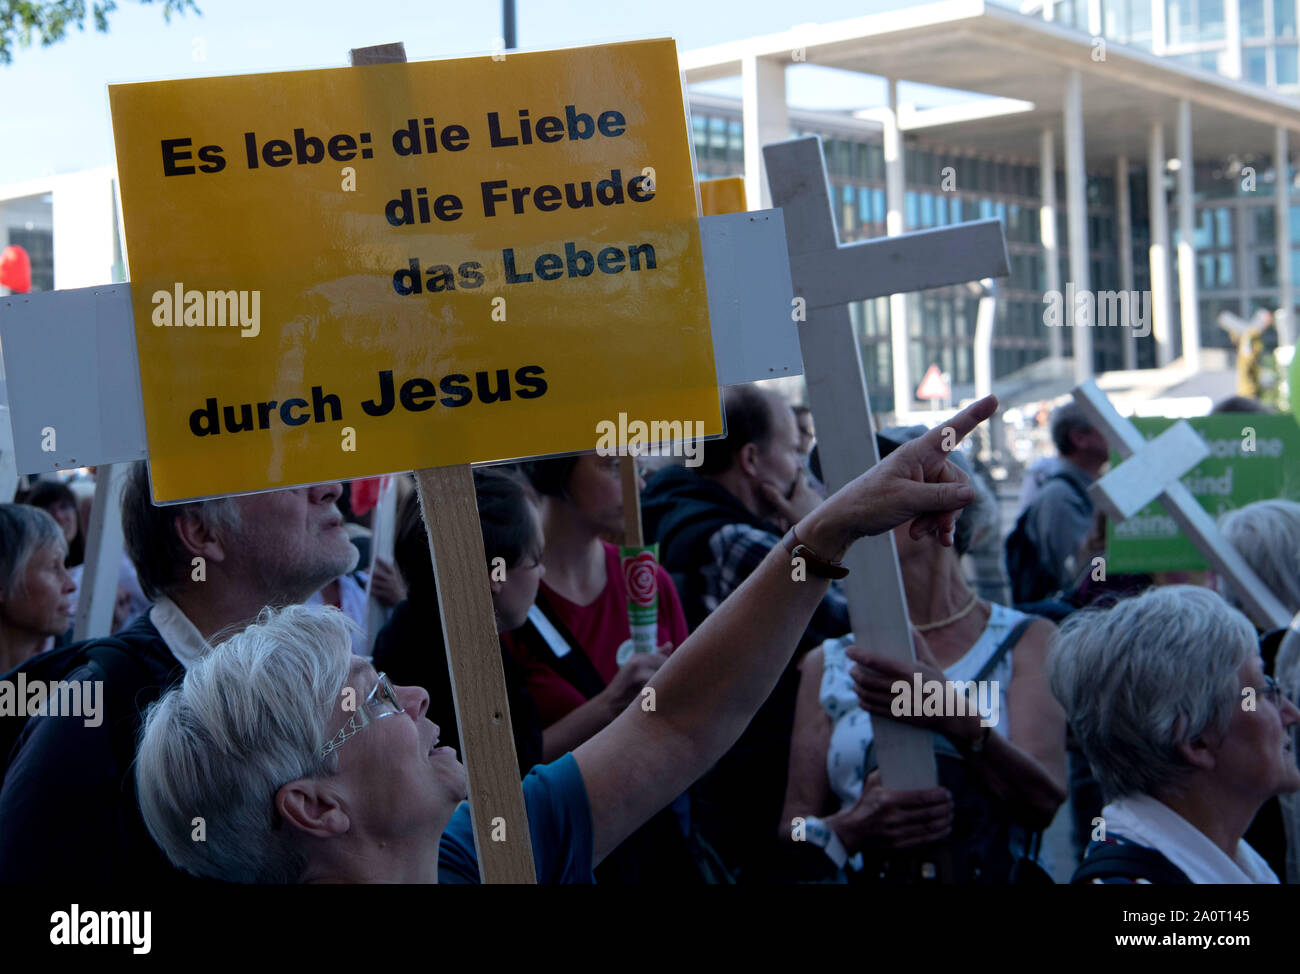 Berlin, Germany. 21st Sep, 2019. A participant from the so-called 'March for Life' holds a sign with the inscription 'Long live: love, joy, life, through Jesus' in the government district. According to the organizer, the association Bundesverband Lebensrecht, the Catholic Church, as well as doctors' and lawyers' associations participated in the 'March for Life'. Hundreds of people demonstrated in Berlin-Mitte against a demonstration by anti-abortion activists. Credit: Paul Zinken/dpa/Alamy Live News Stock Photo